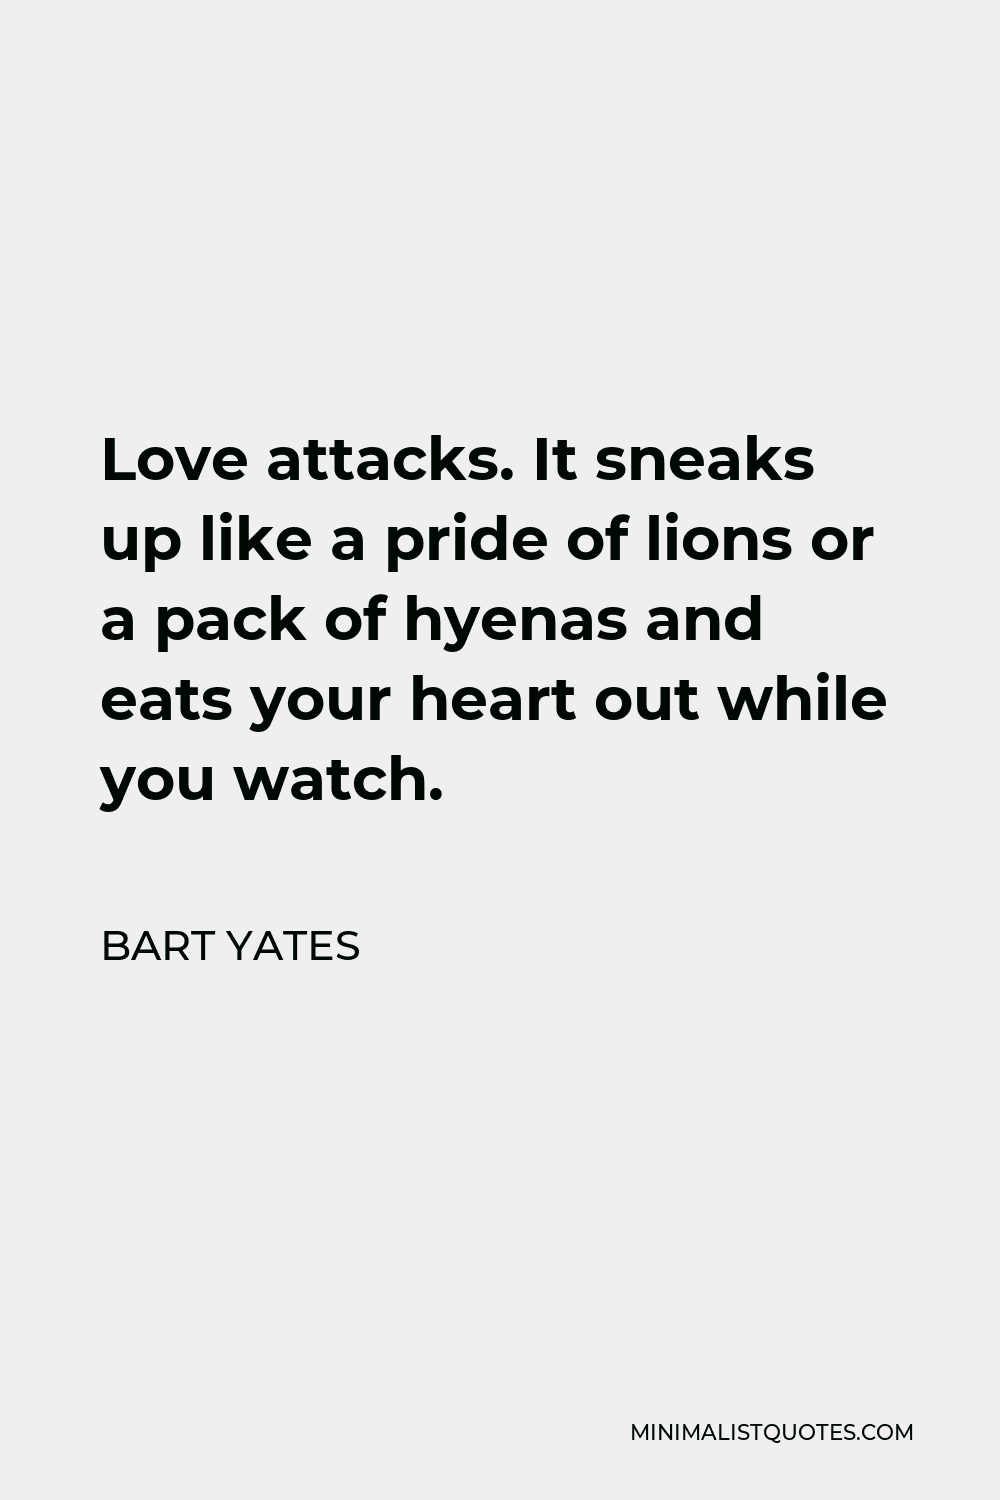 Bart Yates Quote - Love attacks. It sneaks up like a pride of lions or a pack of hyenas and eats your heart out while you watch.